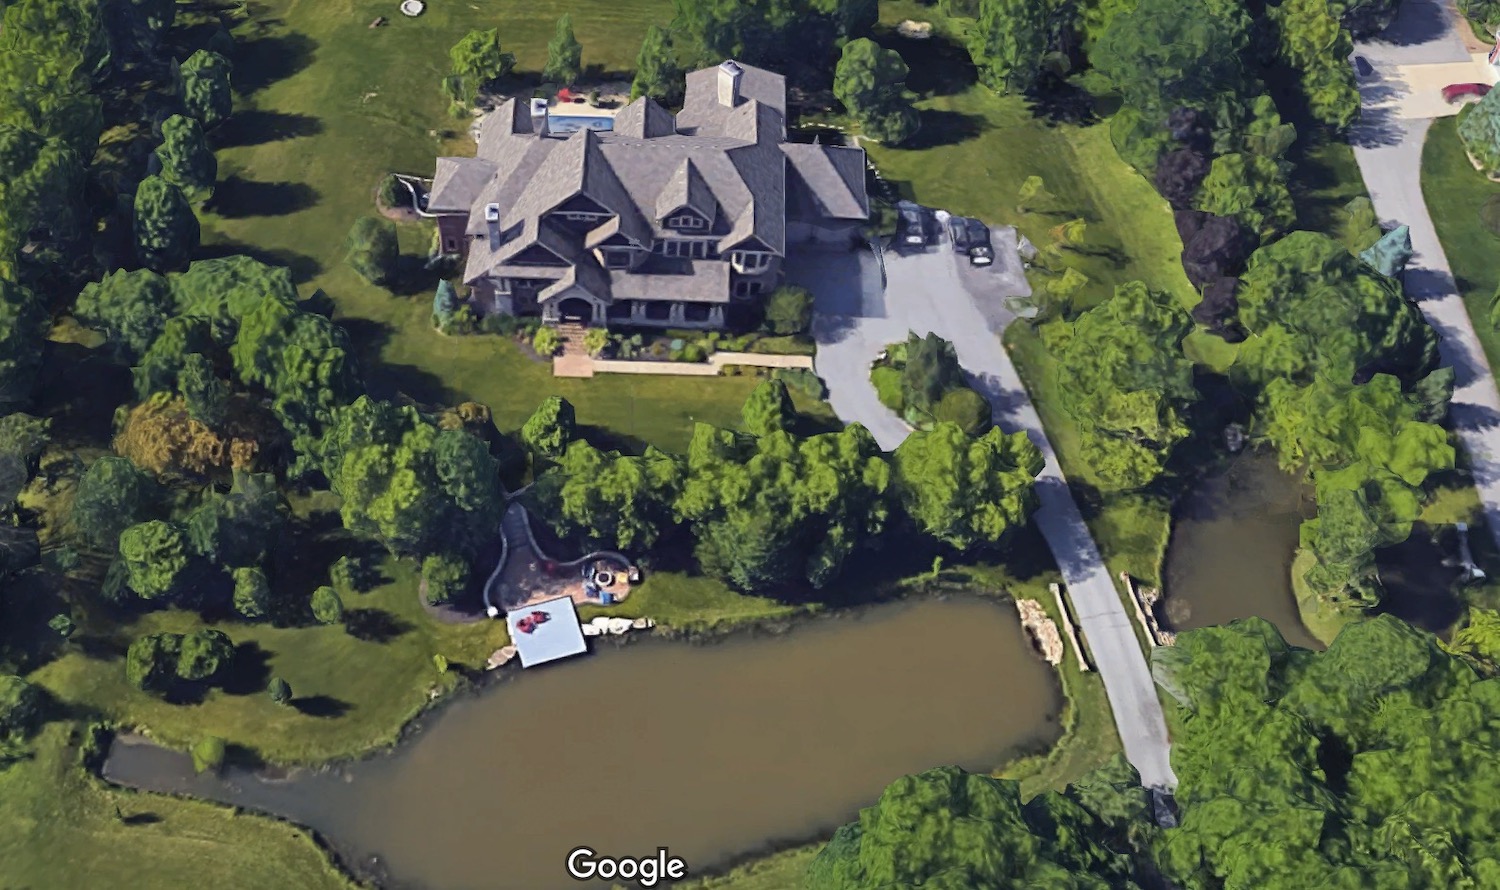 Mike Pence's new house as rendered by Google Maps' 3D imaging.